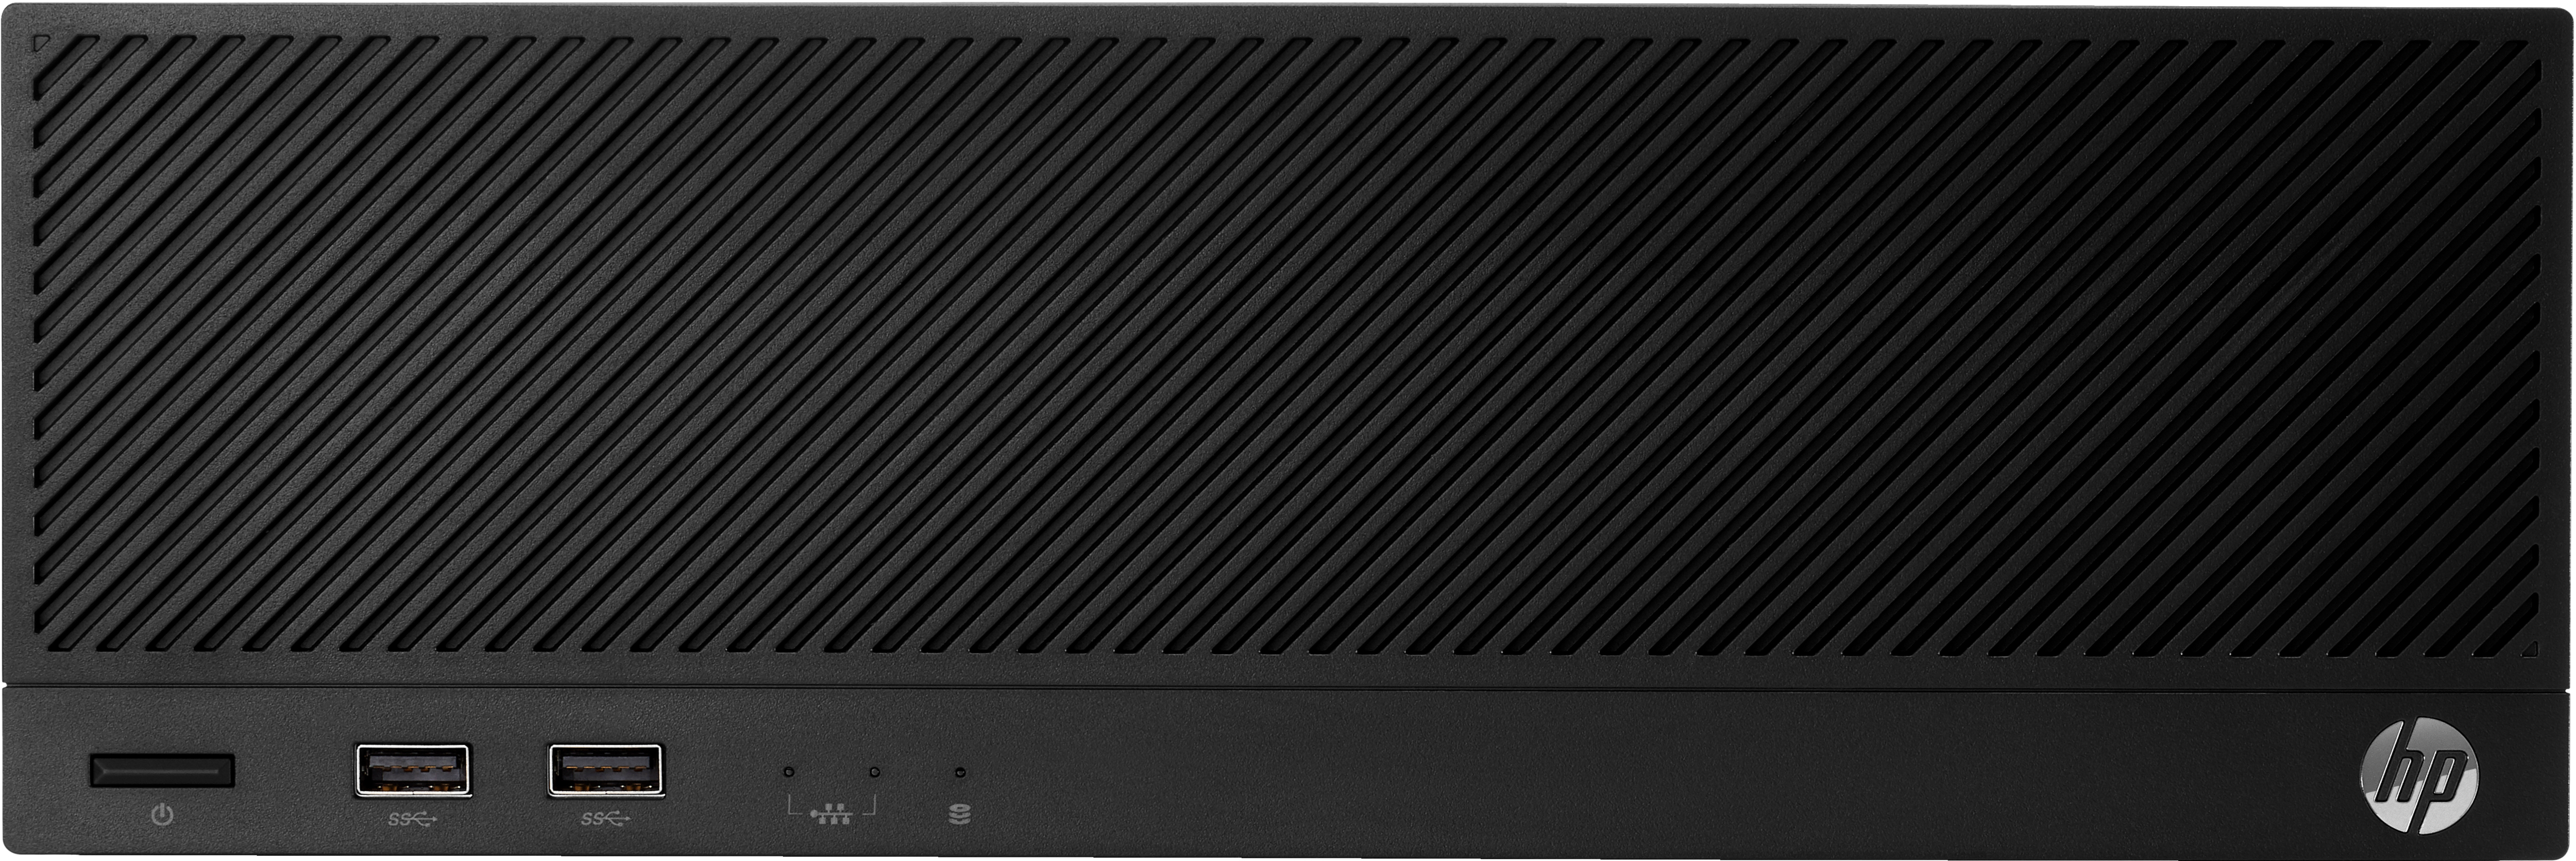 HP Engage Flex Pro-C Retail System - USFF - 1 x Core i3 8100T / 3.1 GHz